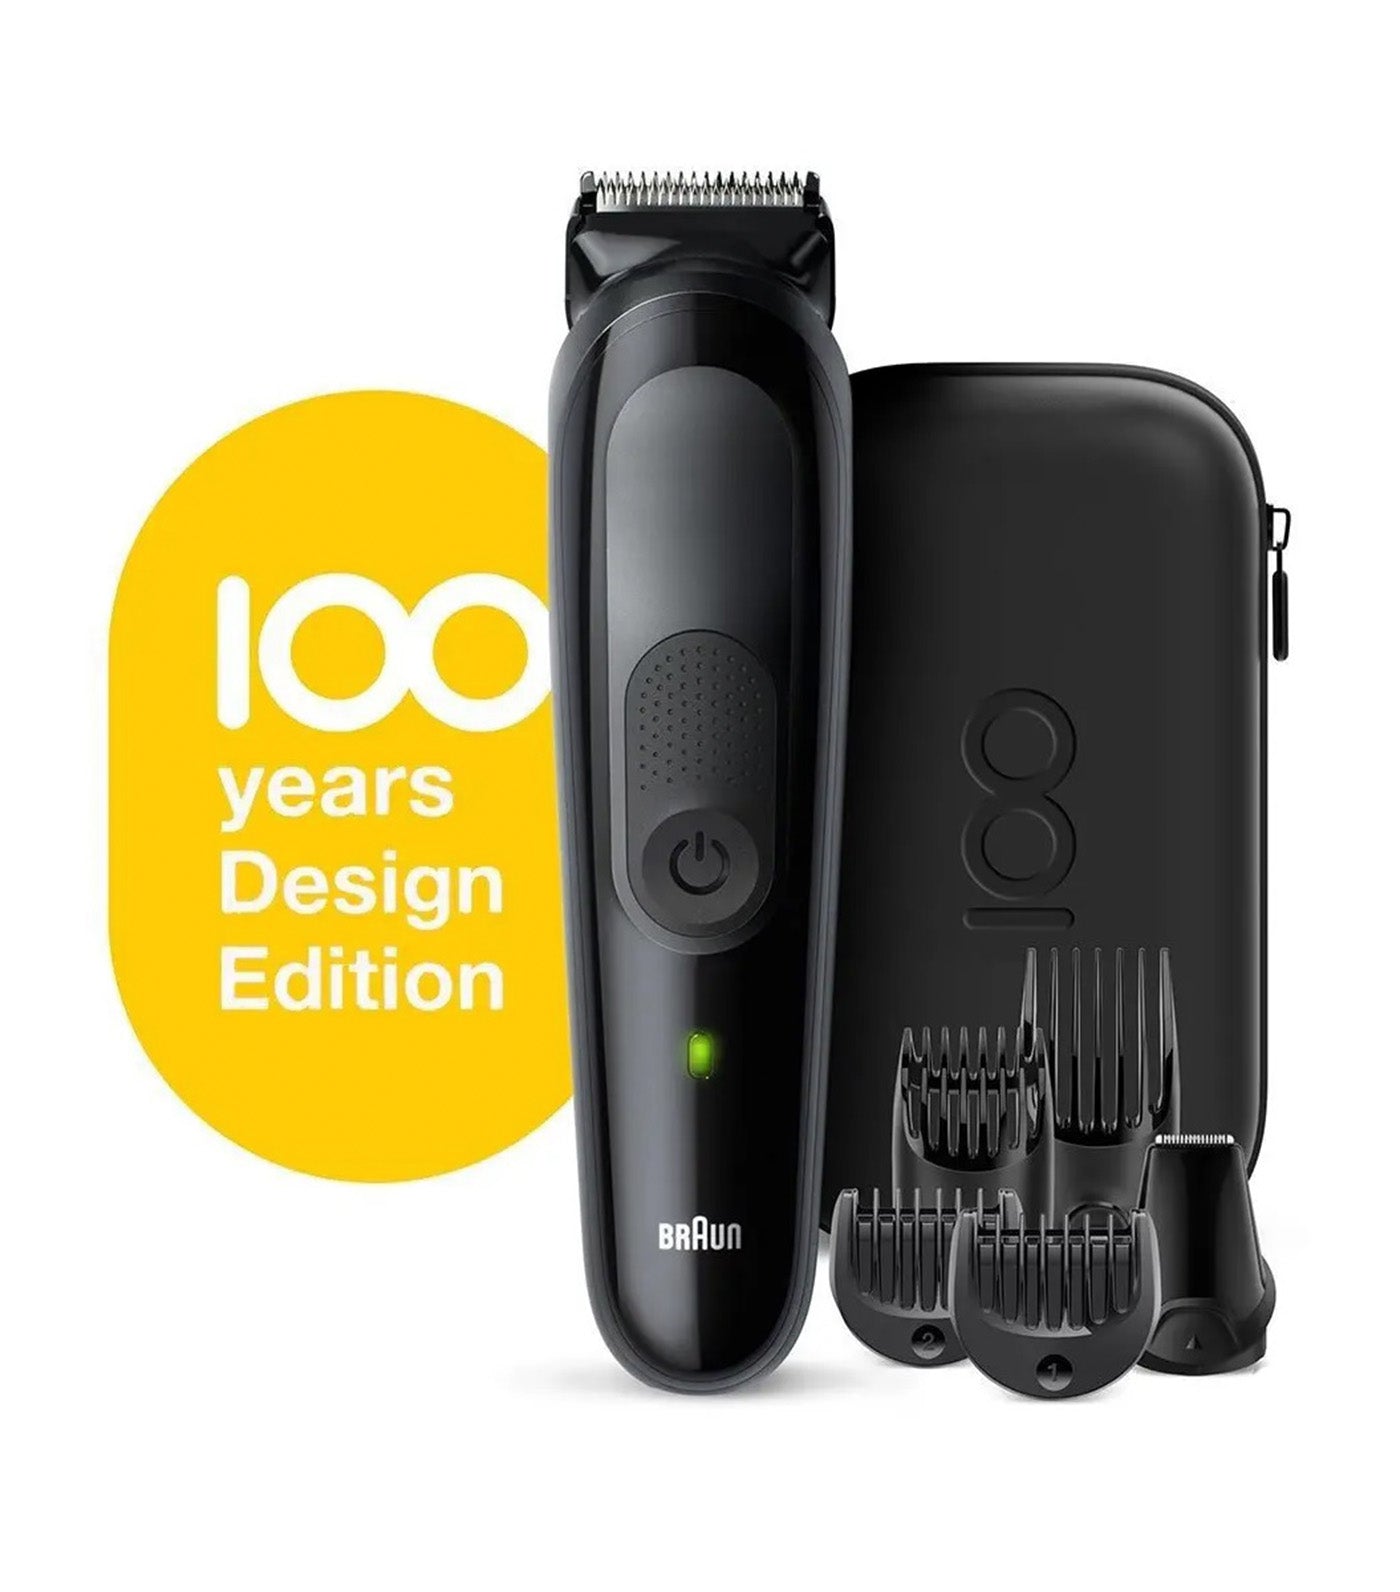 6-In-1 Face Styling Kit Limited Years Braun Black and Precise Edition Case 100 Travel Styling Head For with